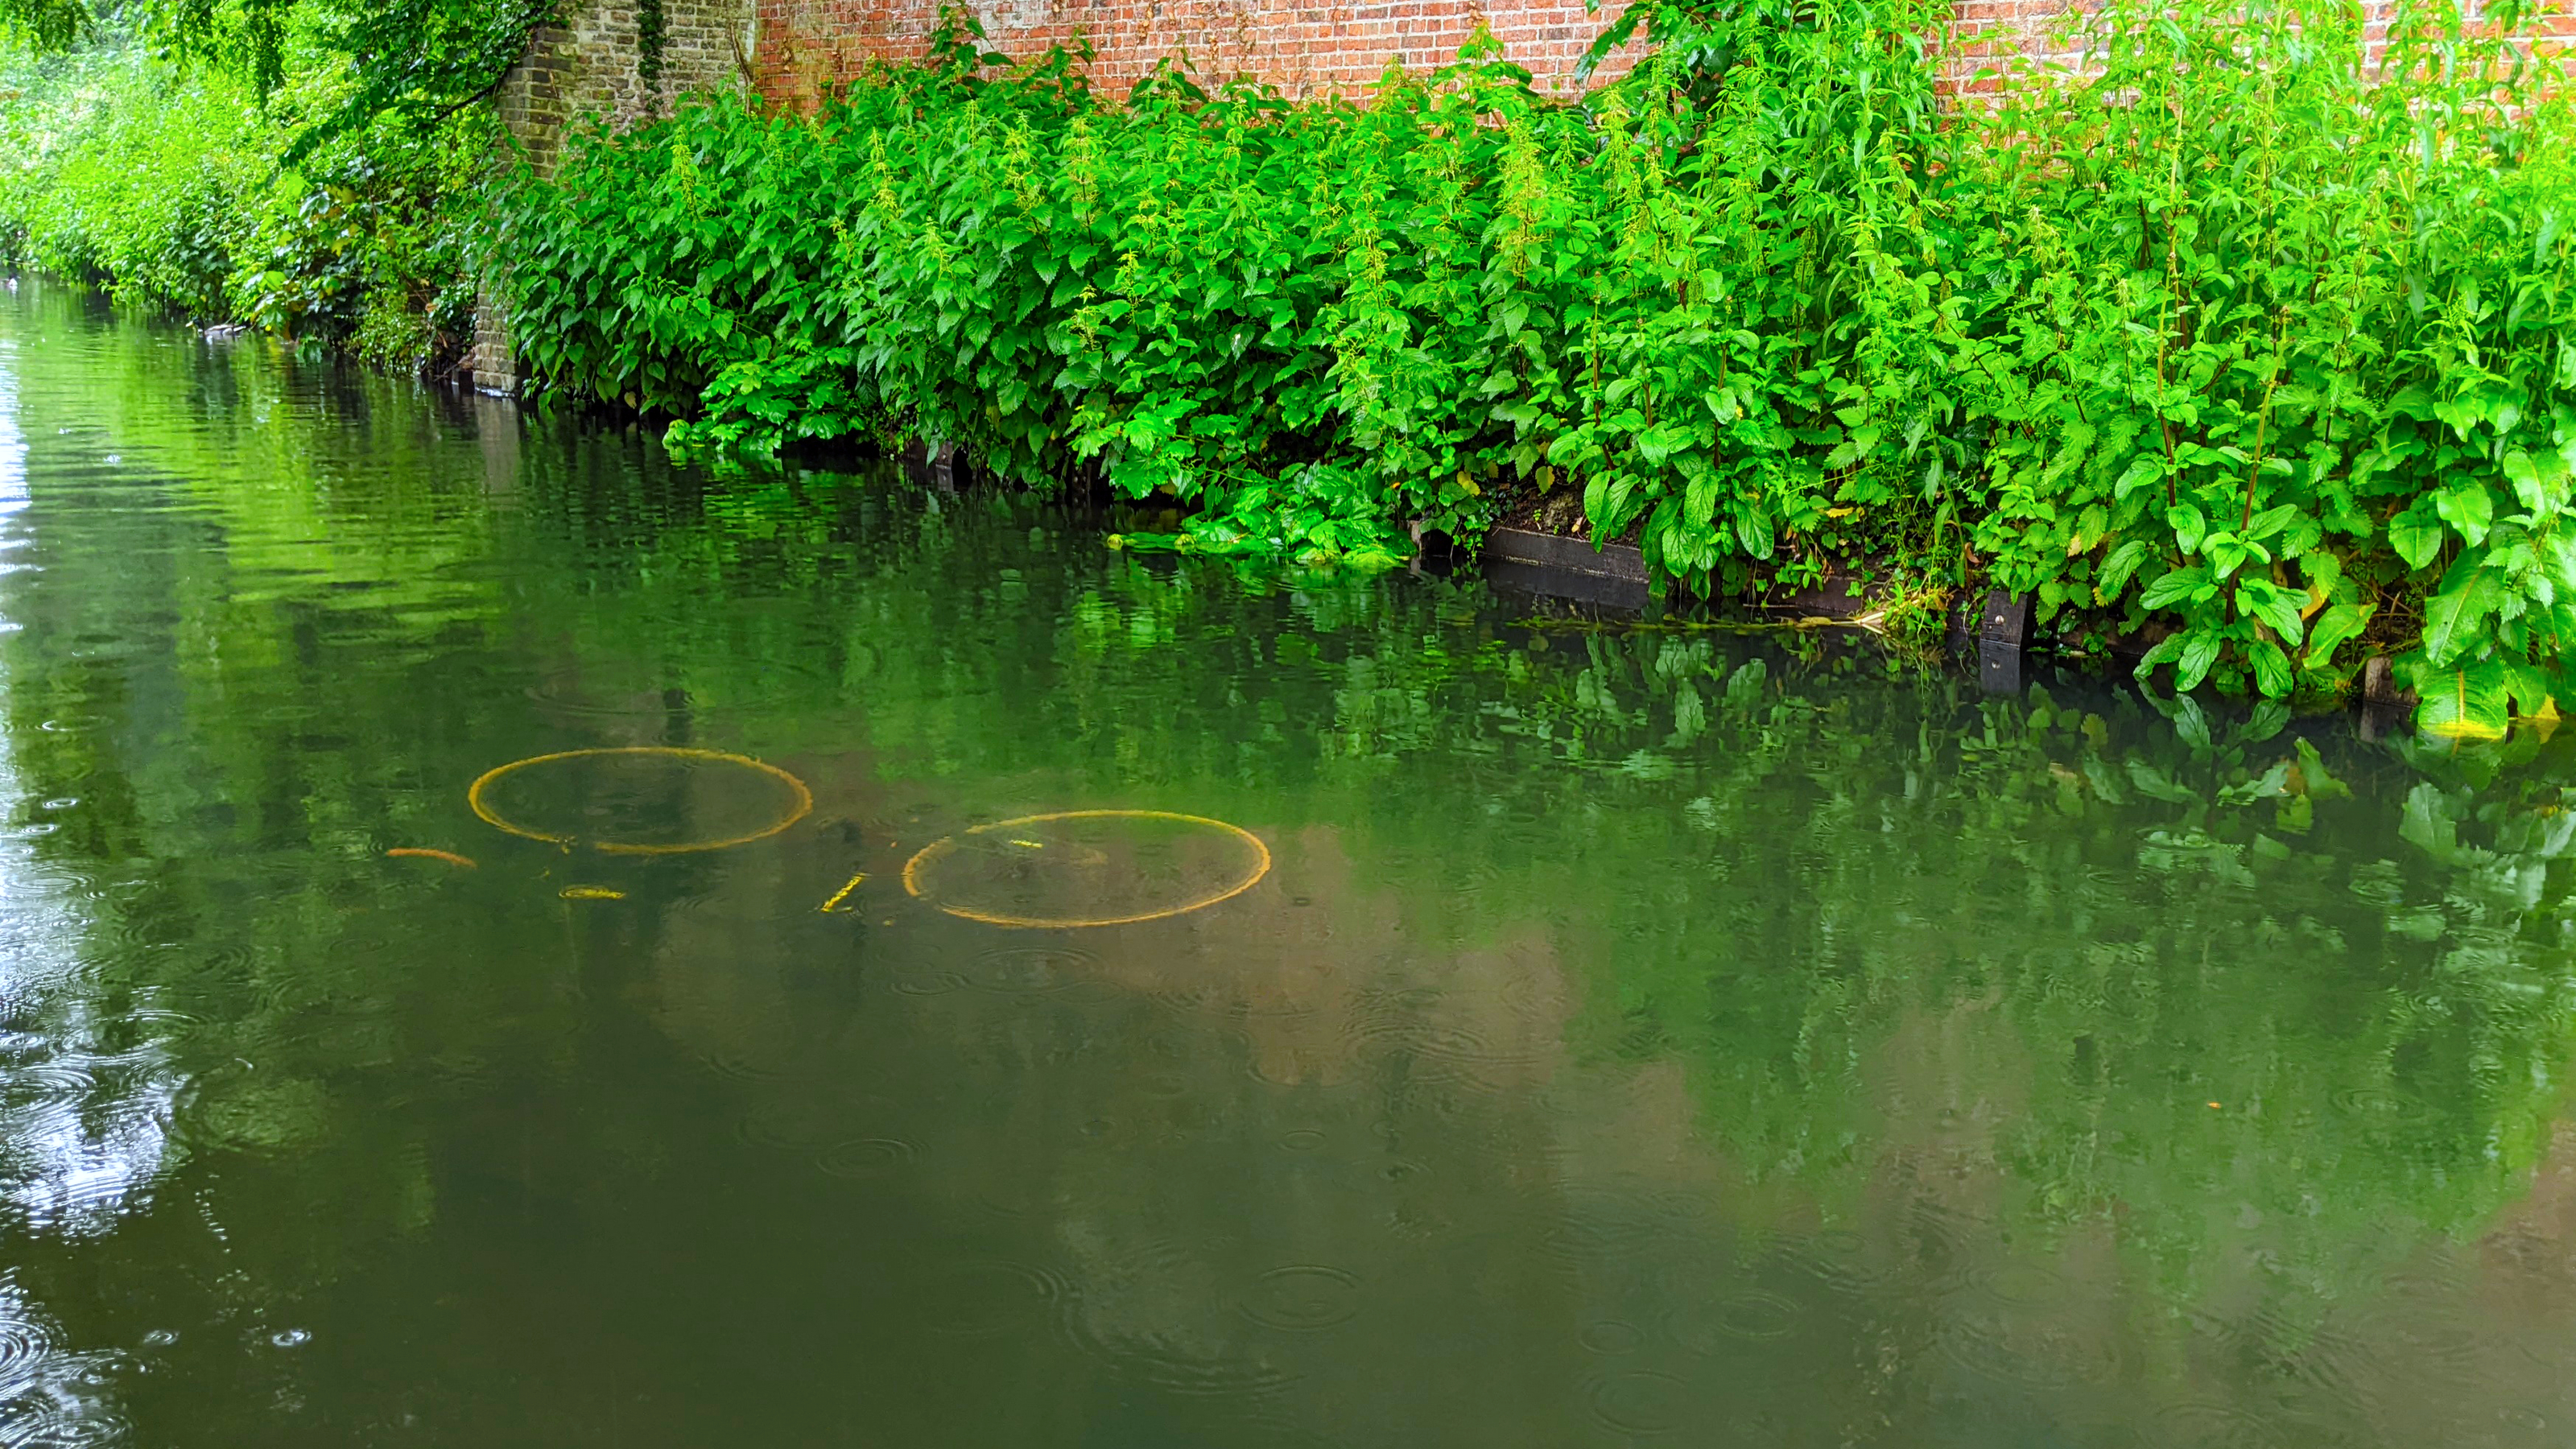 Submerged bicycle in a canal by a lush, ivy-covered brick wall under a grey sky.